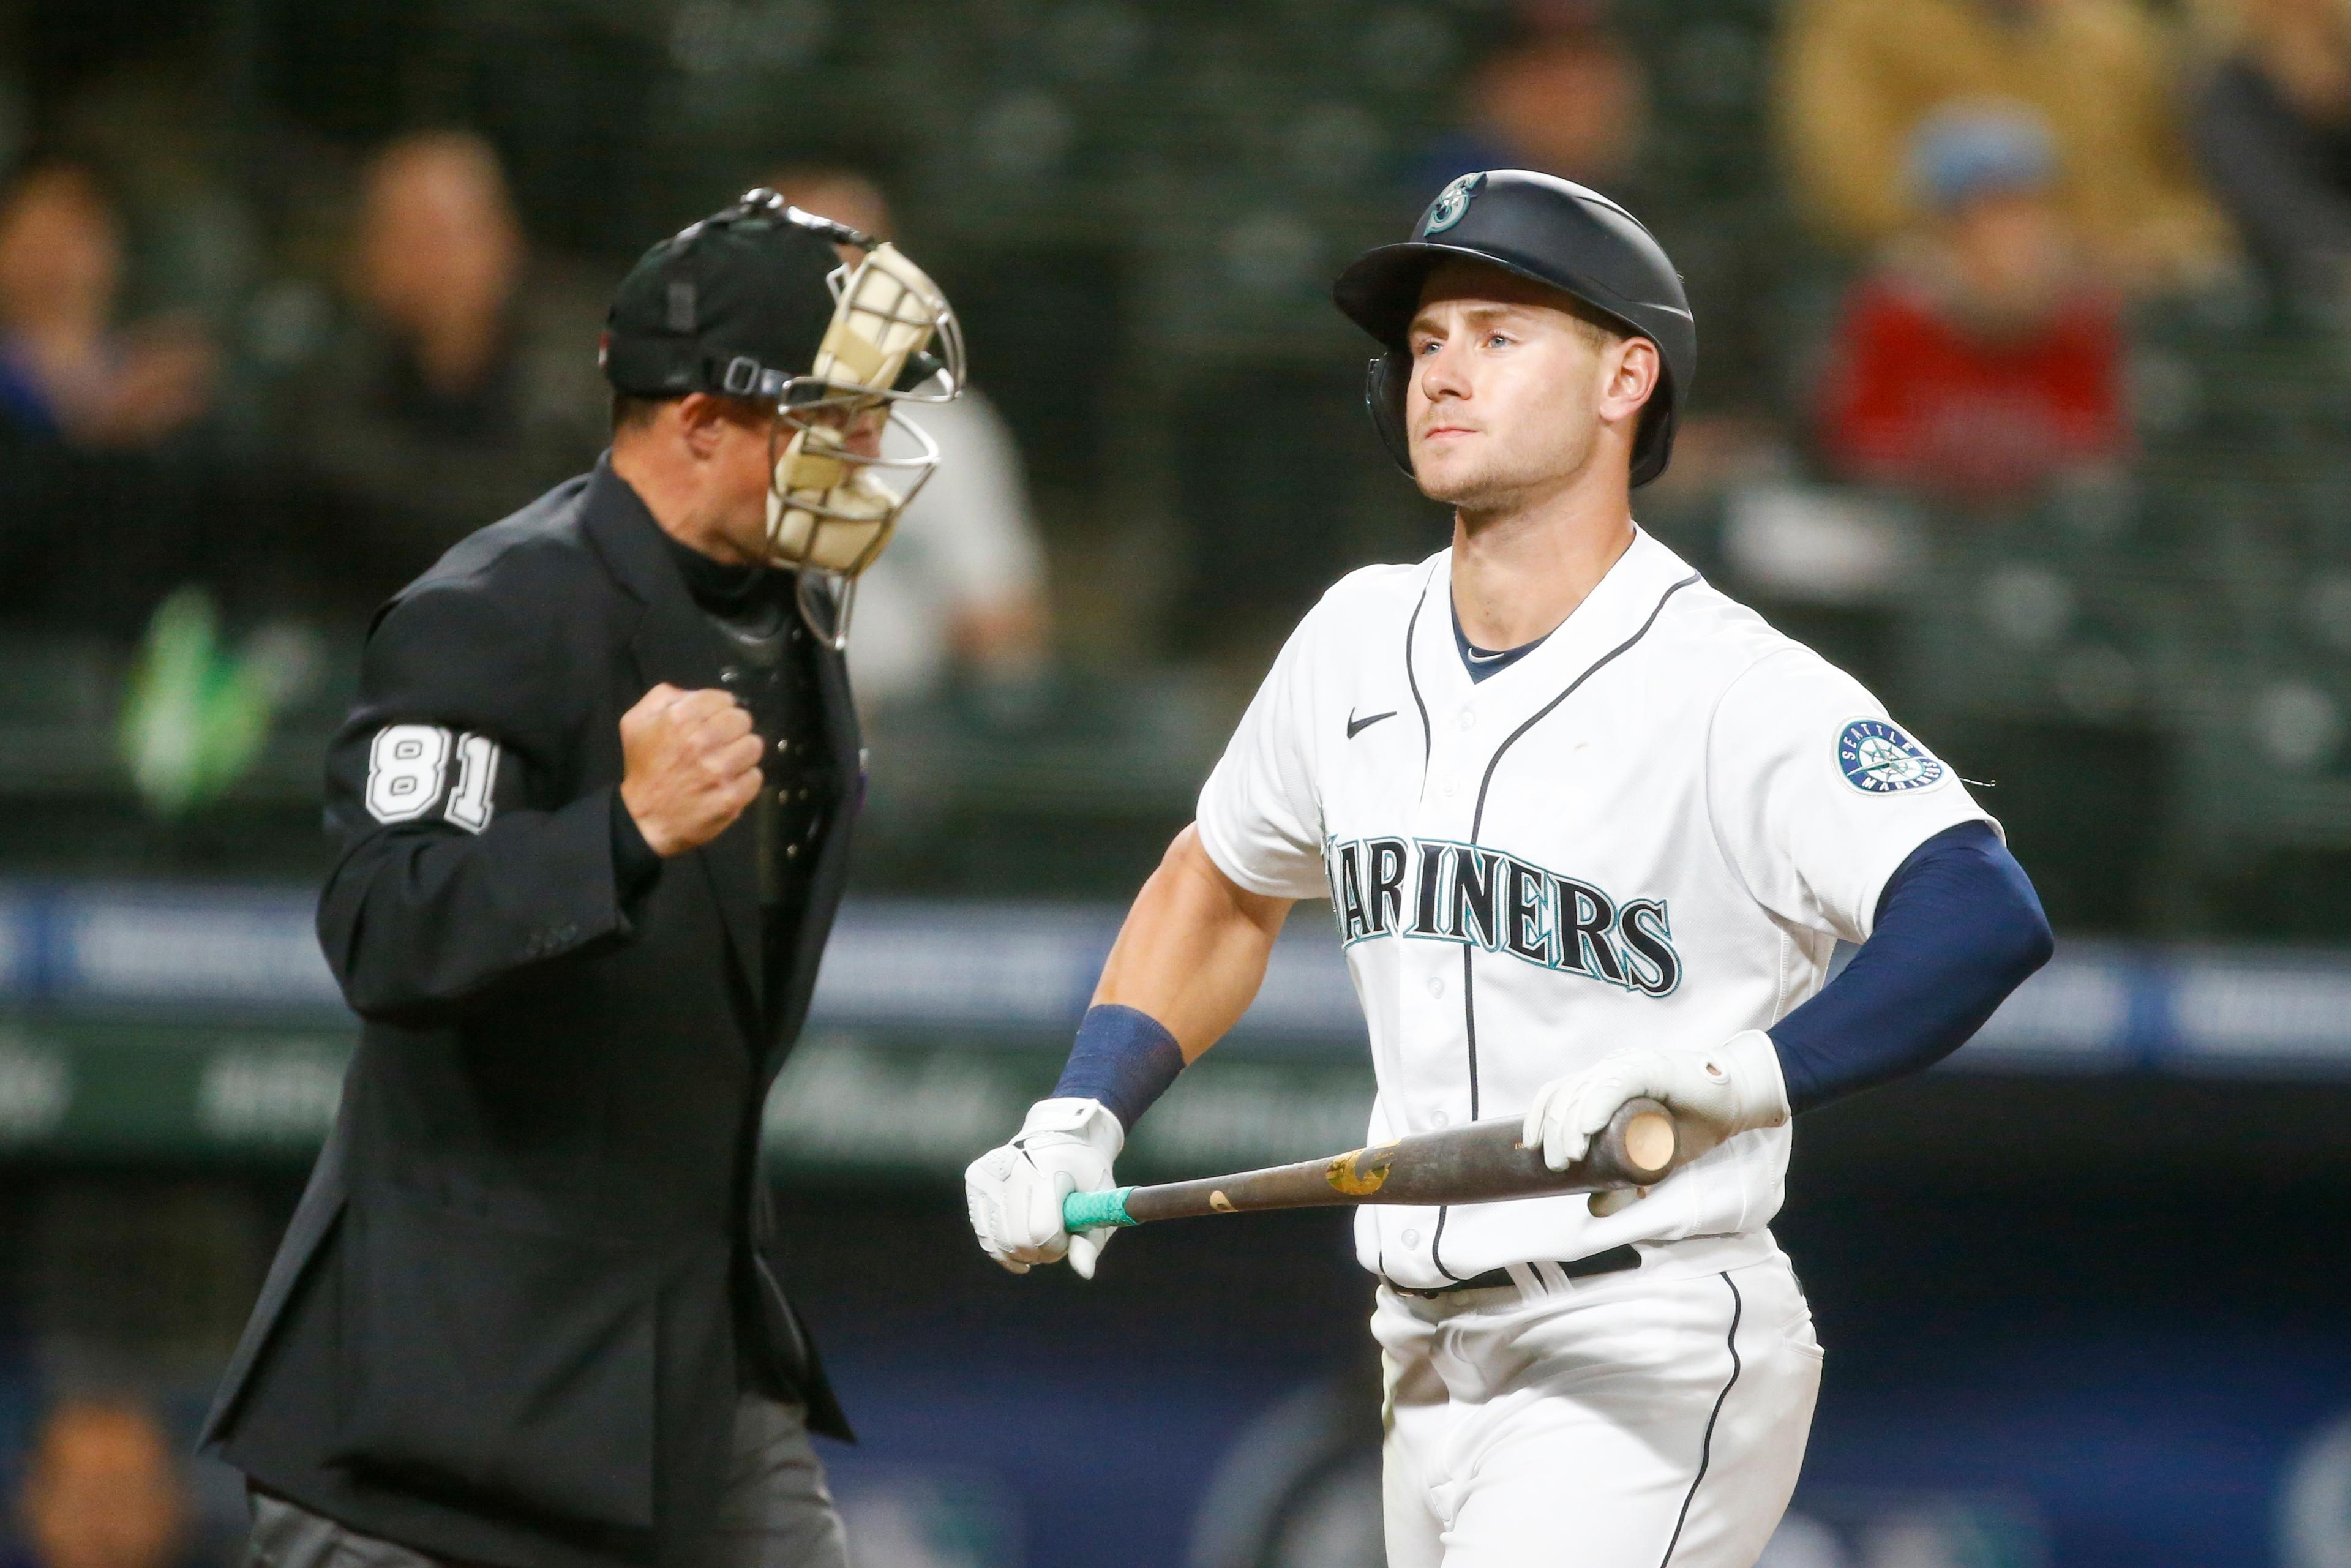 May 27, 2021; Seattle, Washington, USA; Seattle Mariners left fielder Jarred Kelenic (10) returns to the dugout after striking out against the Texas Rangers during the seventh inning at T-Mobile Park. Mandatory Credit: Joe Nicholson-USA TODAY Sports / Joe Nicholson-USA TODAY Sports